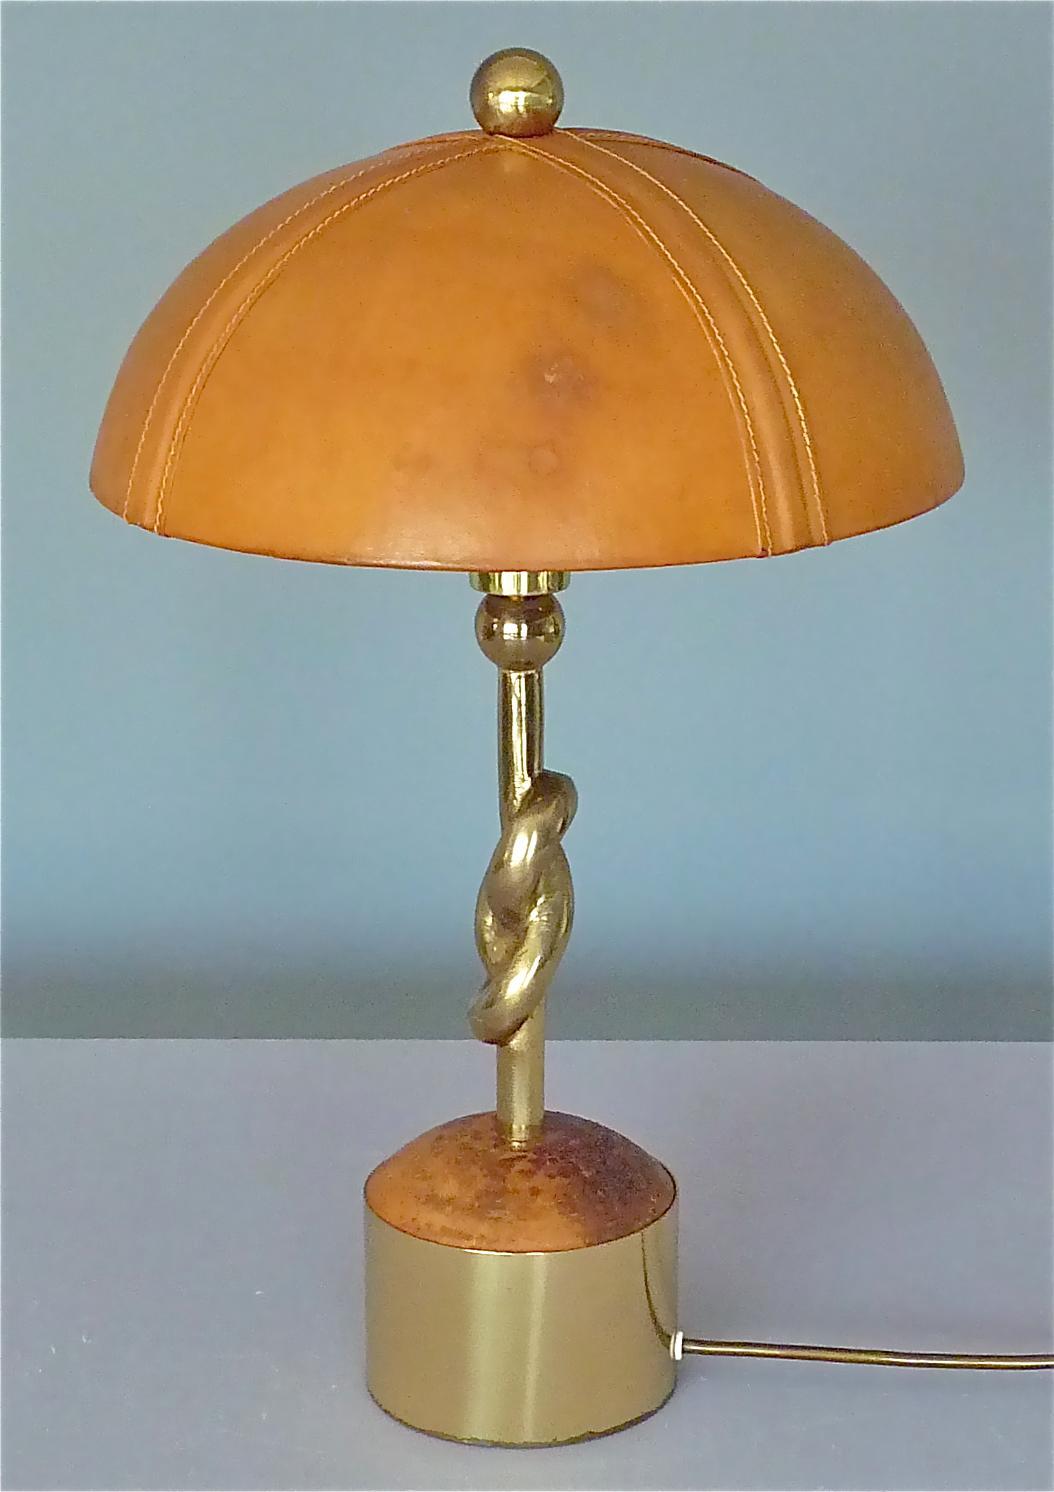 Sculptural Gilt Bronze Leather Knotted Table Lamp French 1970s Jansen Pergay Era For Sale 9